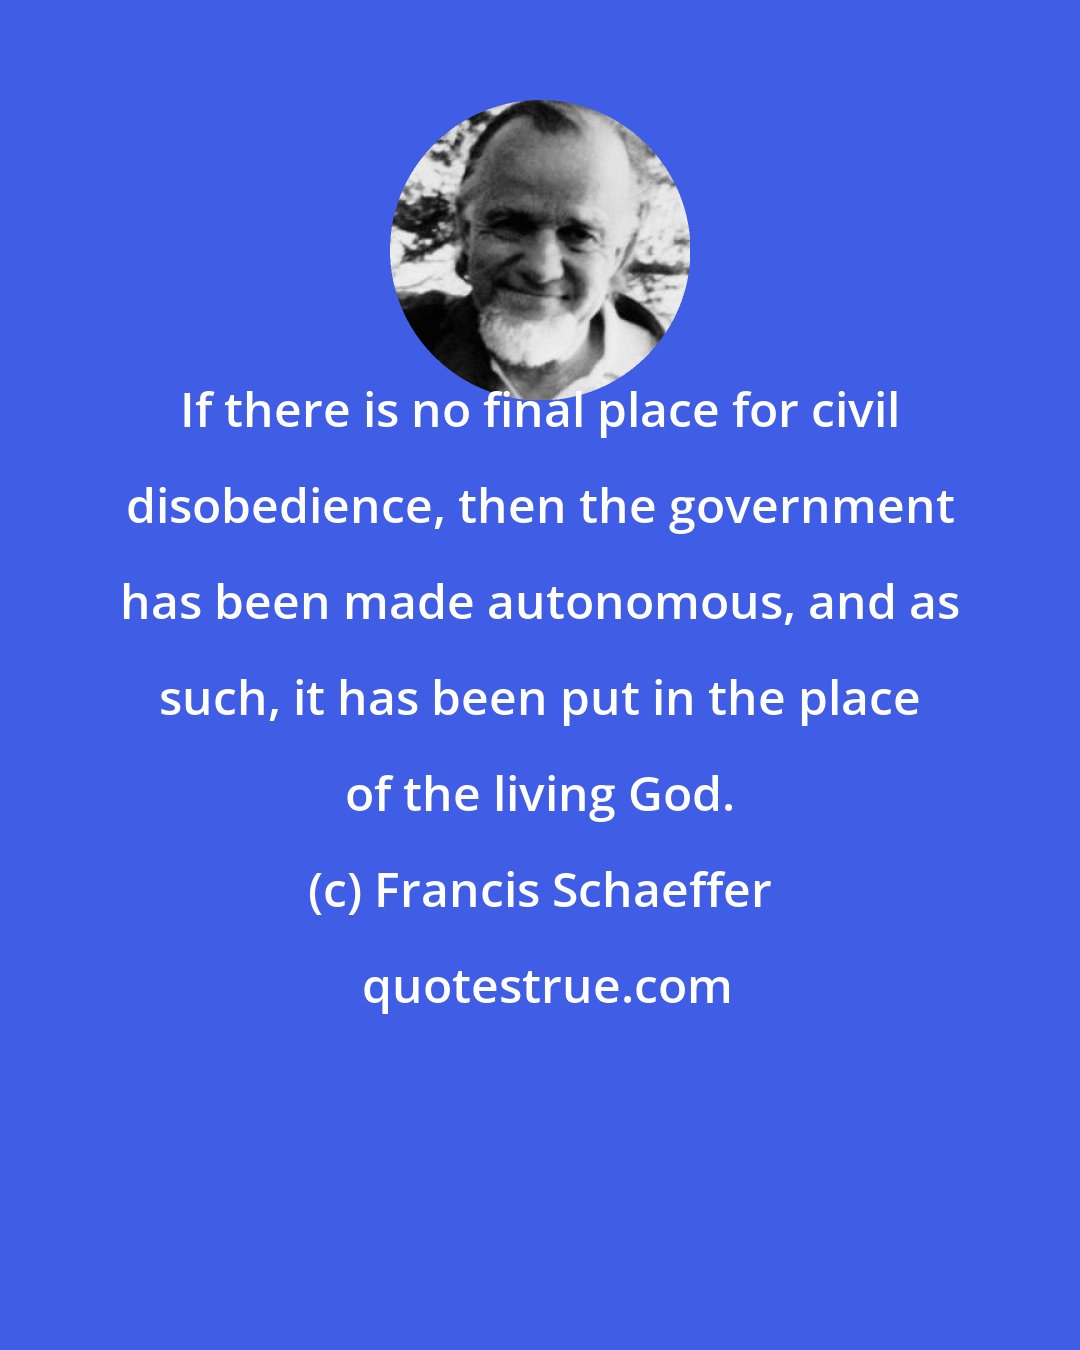 Francis Schaeffer: If there is no final place for civil disobedience, then the government has been made autonomous, and as such, it has been put in the place of the living God.